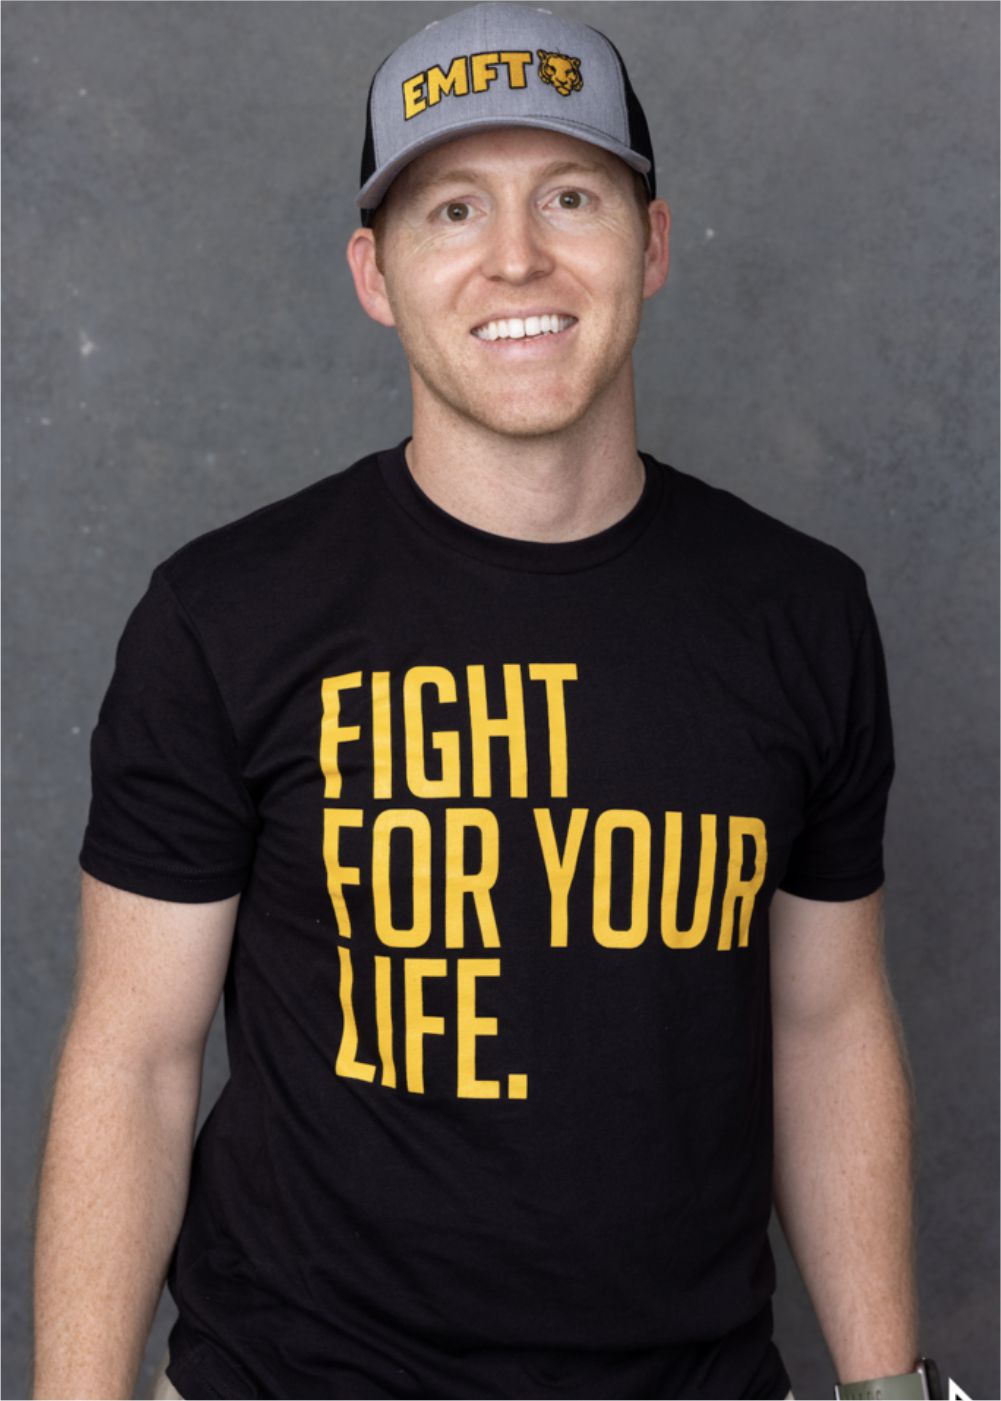 Stop waiting for someone to save you. Fight or your life.  Great t-shirt. Bold and brash-like you.